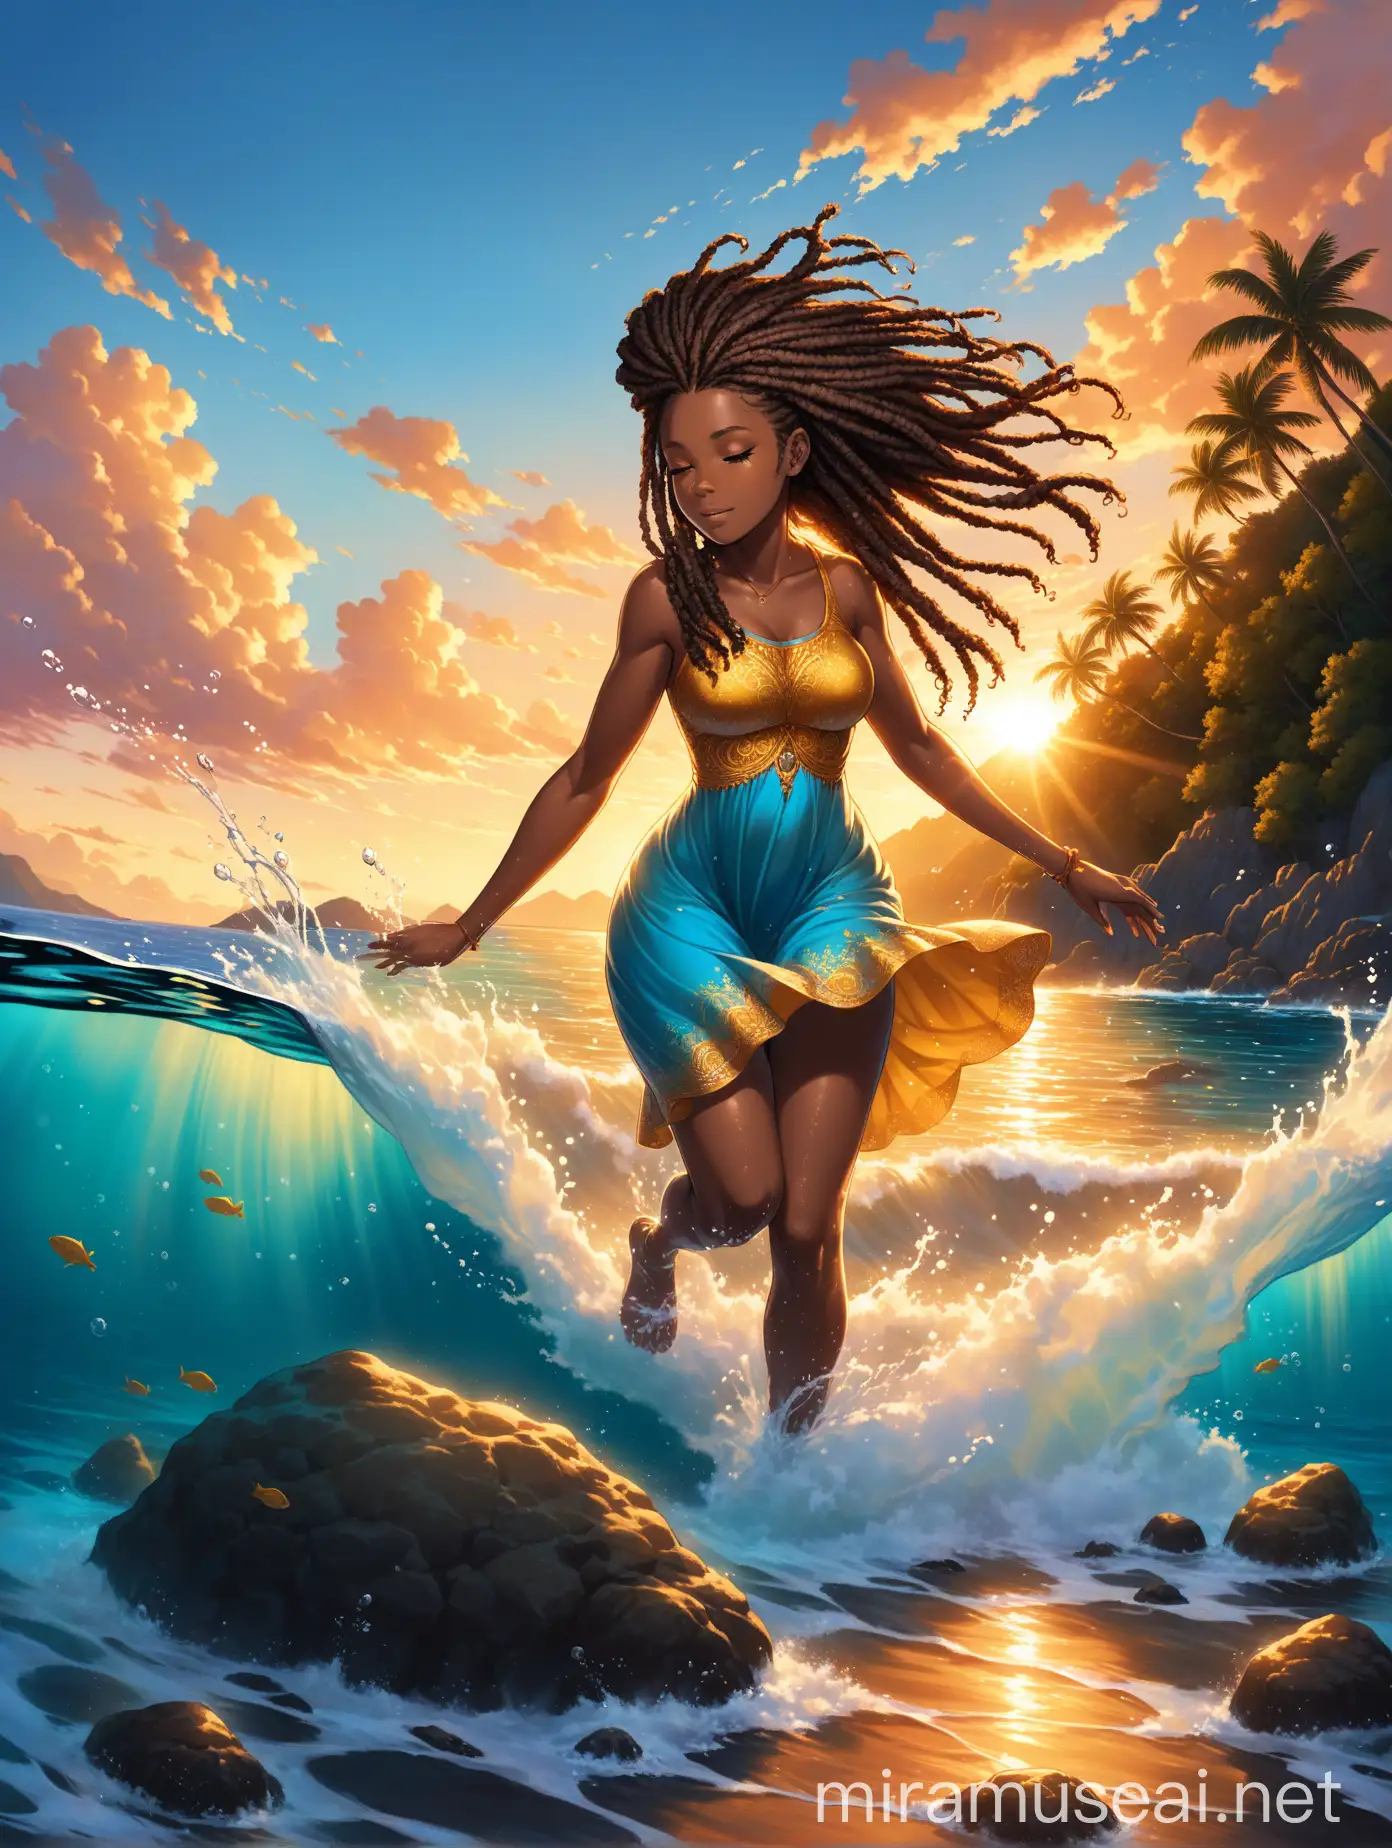 best quality, very detailed, underwater photography, Beautiful Black girl, about 40 years old, dreadlocks, wearing a blue and gold dress, water splashing at her feet, small waves, sunset, sea, trees, rocks, islands, bright and perfectly puffy clouds, Mellie BIOR over her head